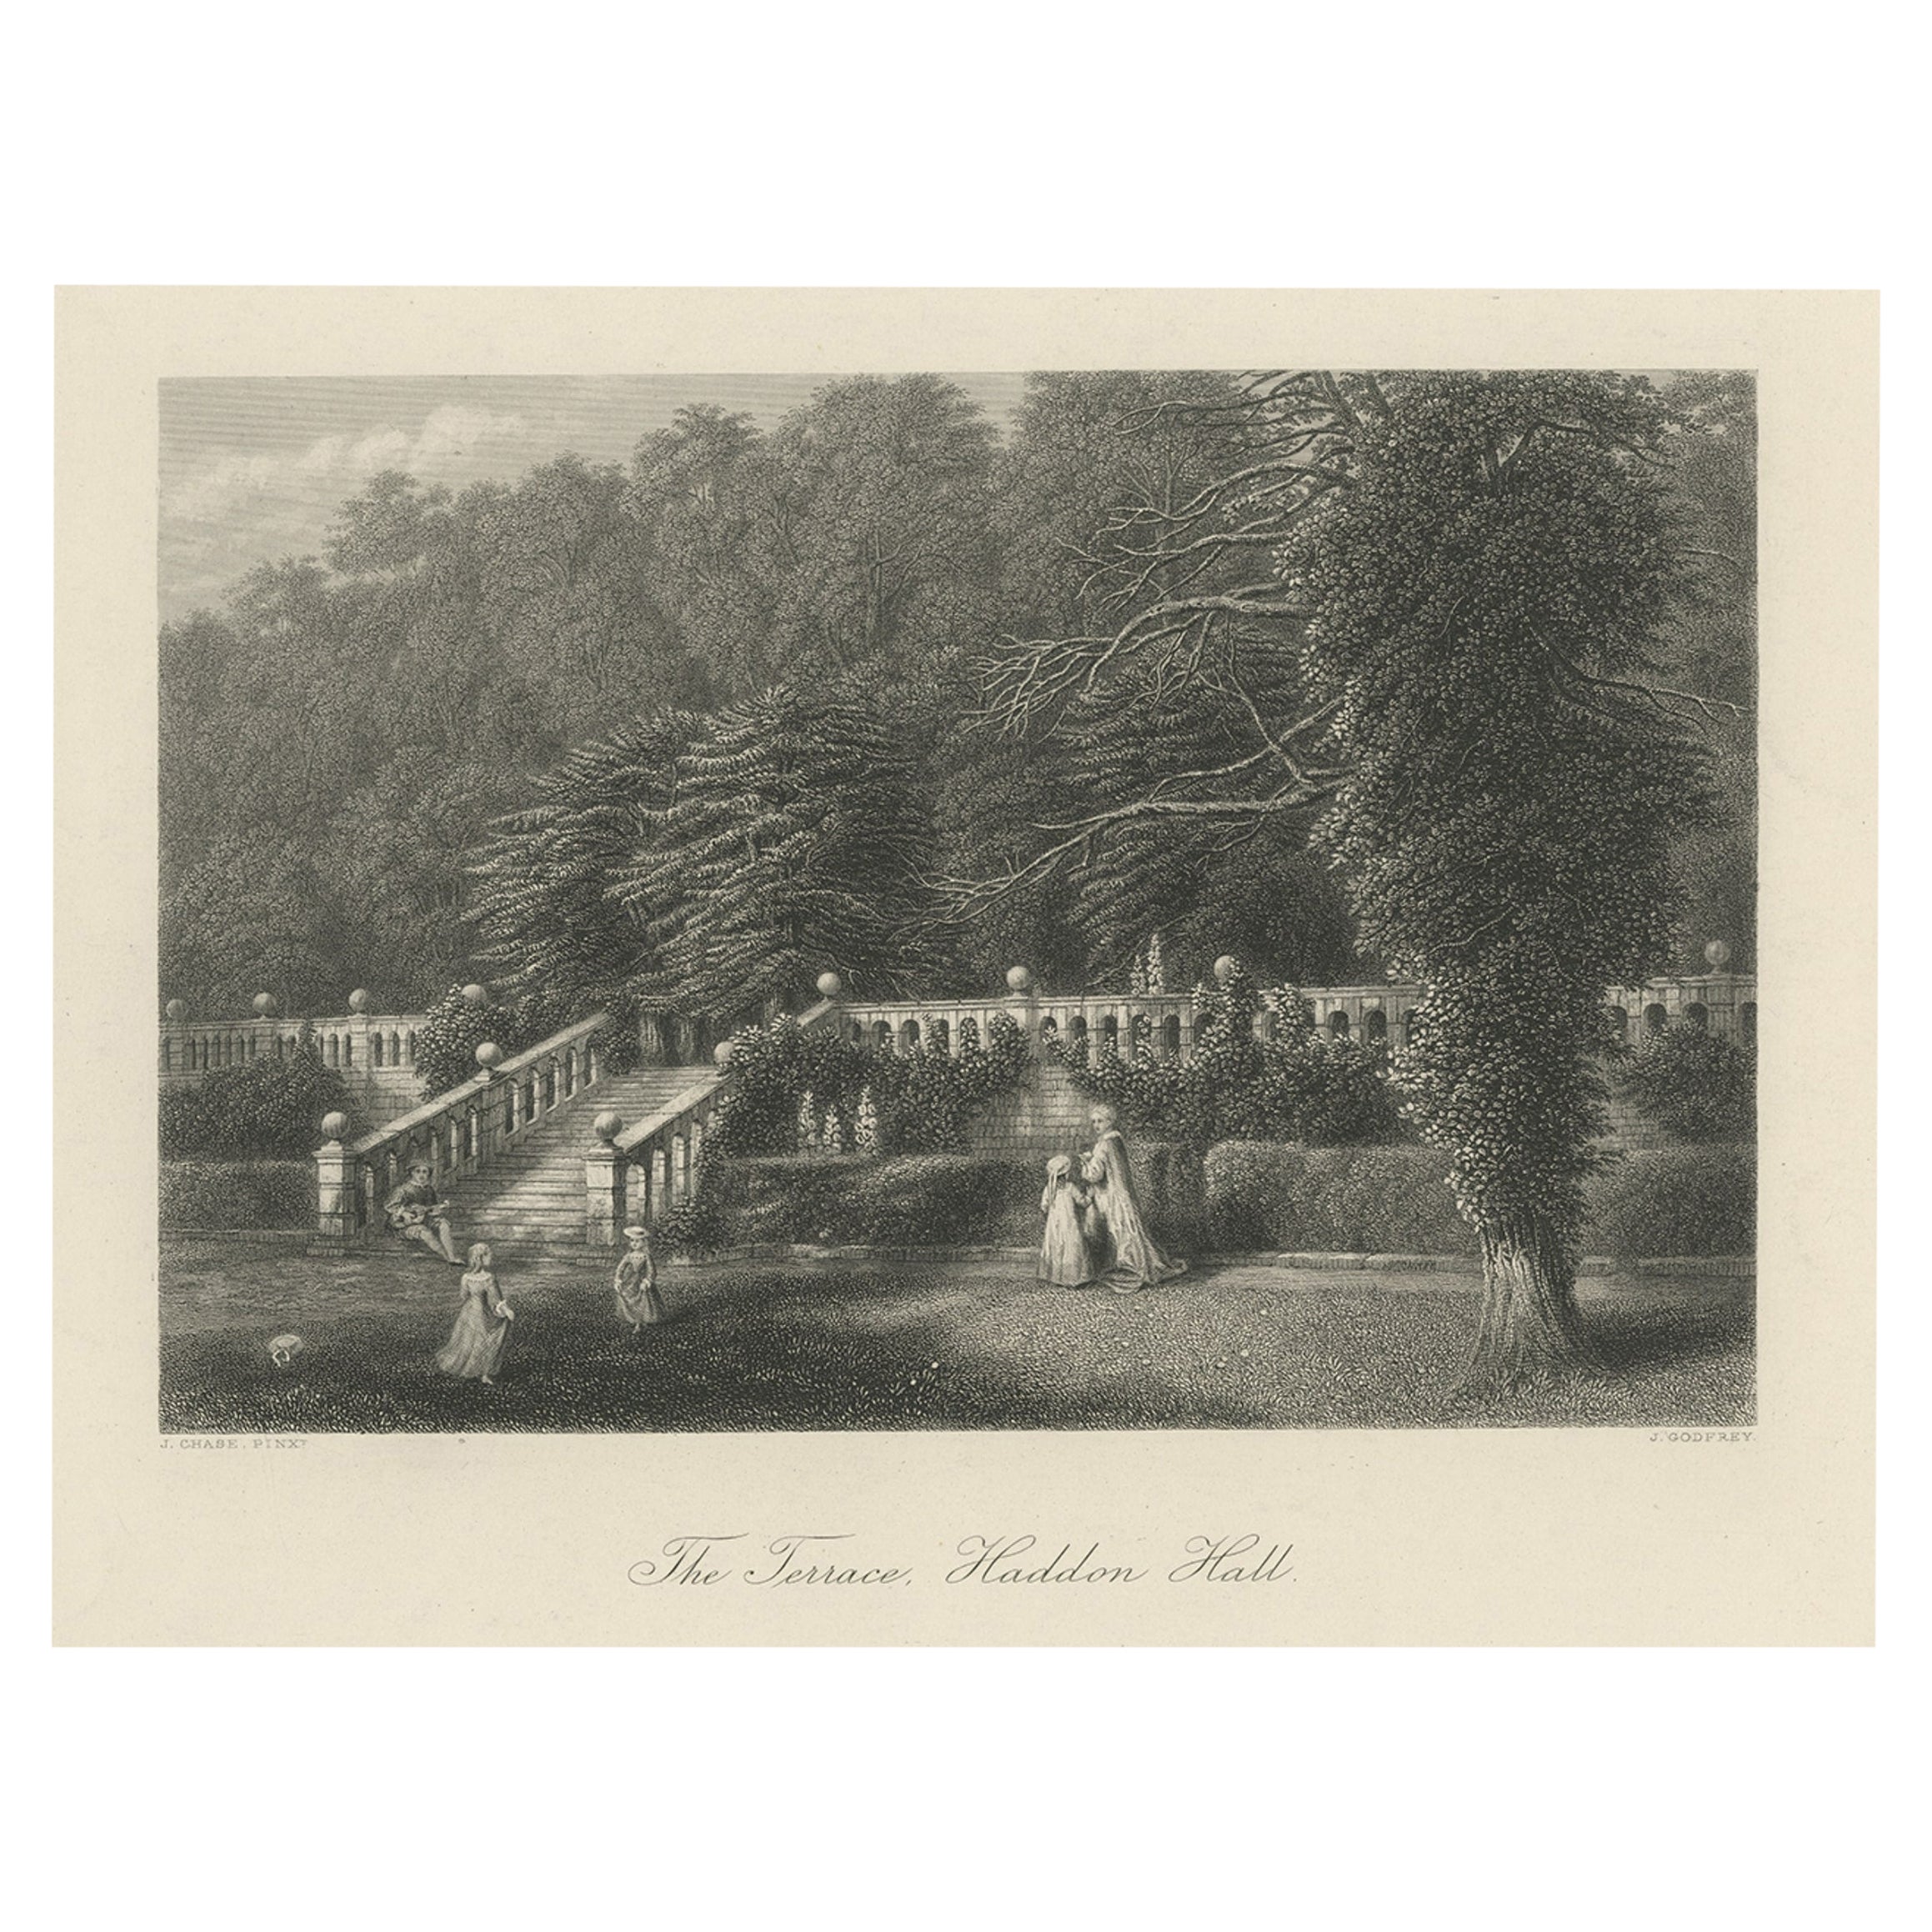 Steel Engraving of Haddon Hall, River Wye, Bakewell, Derbyshire, England, 1875 For Sale